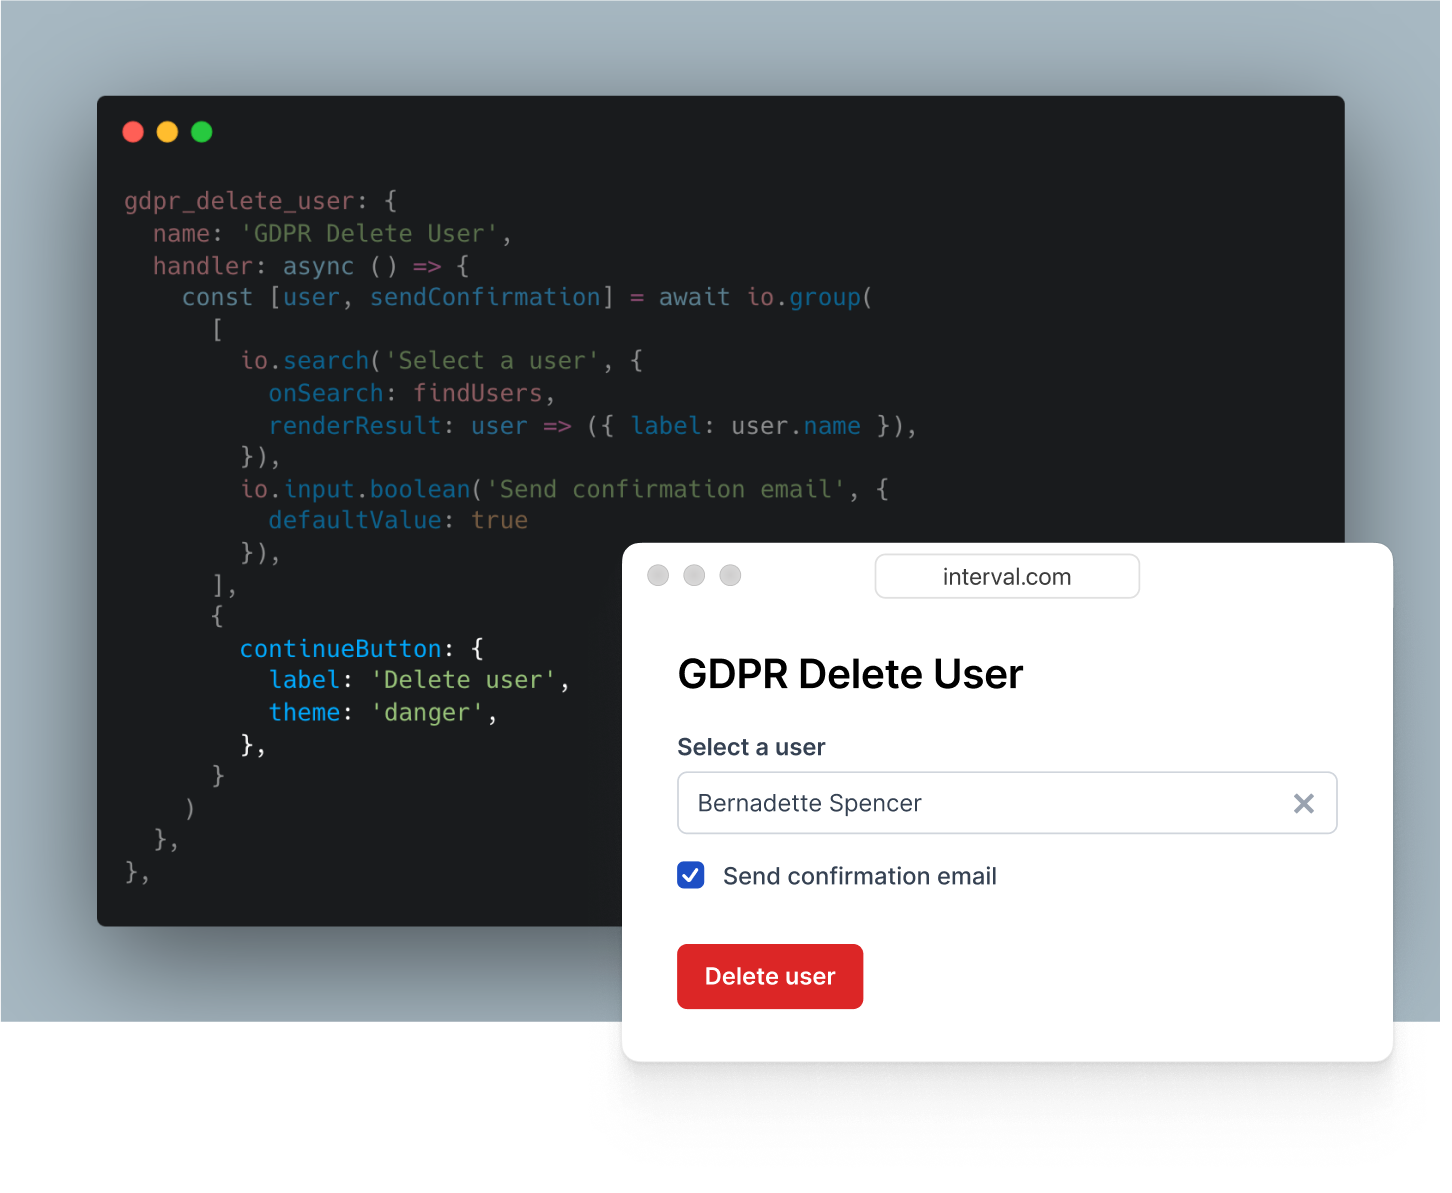 A form called 'GDPR Delete User' with a red button that says 'Delete user'.